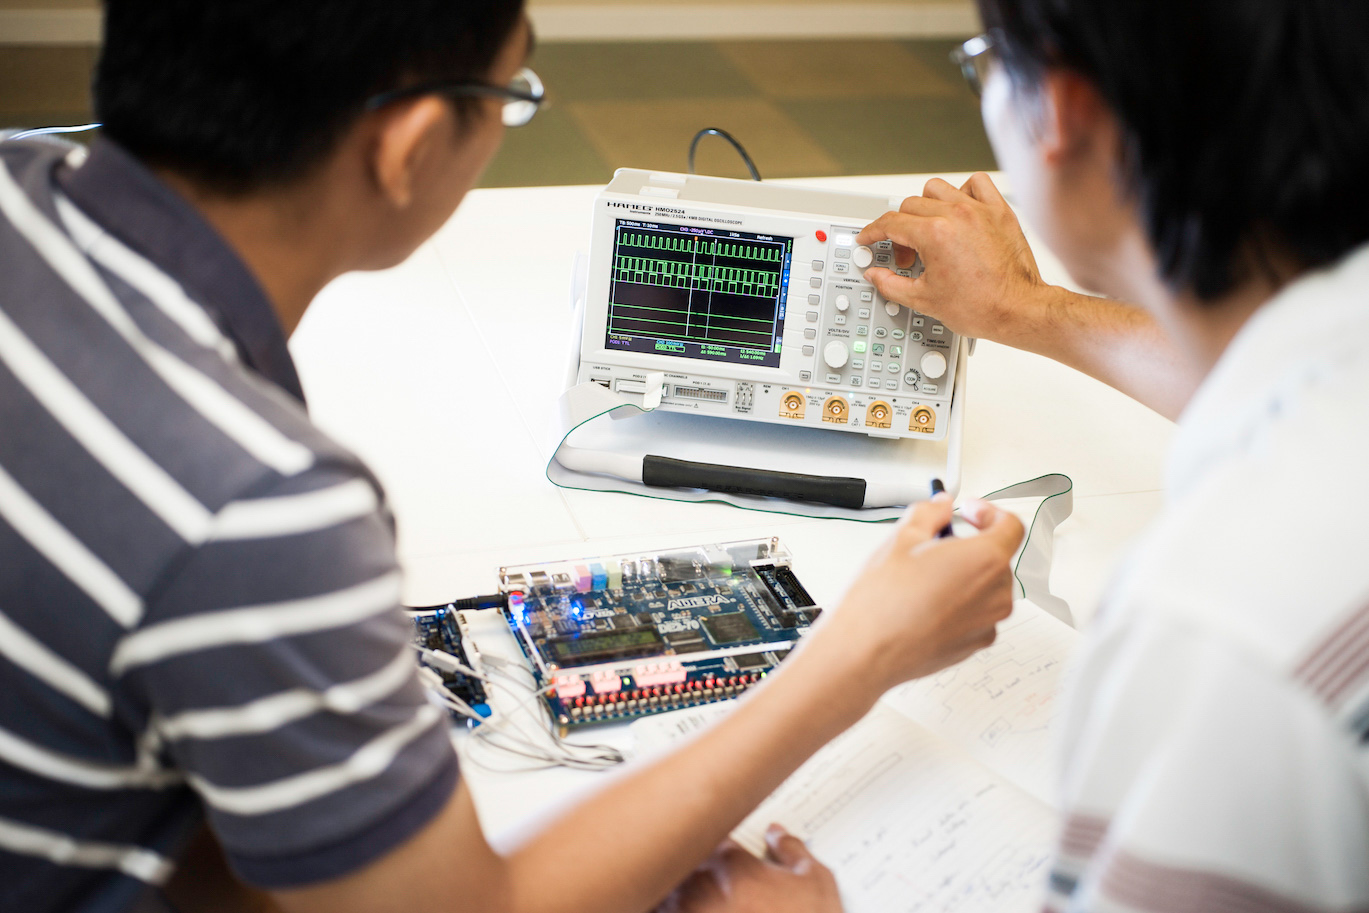 Students can undertake the Bachelor of Engineering (Electrical and Electronic Engineering) (Honours) at RMIT Vietnam.